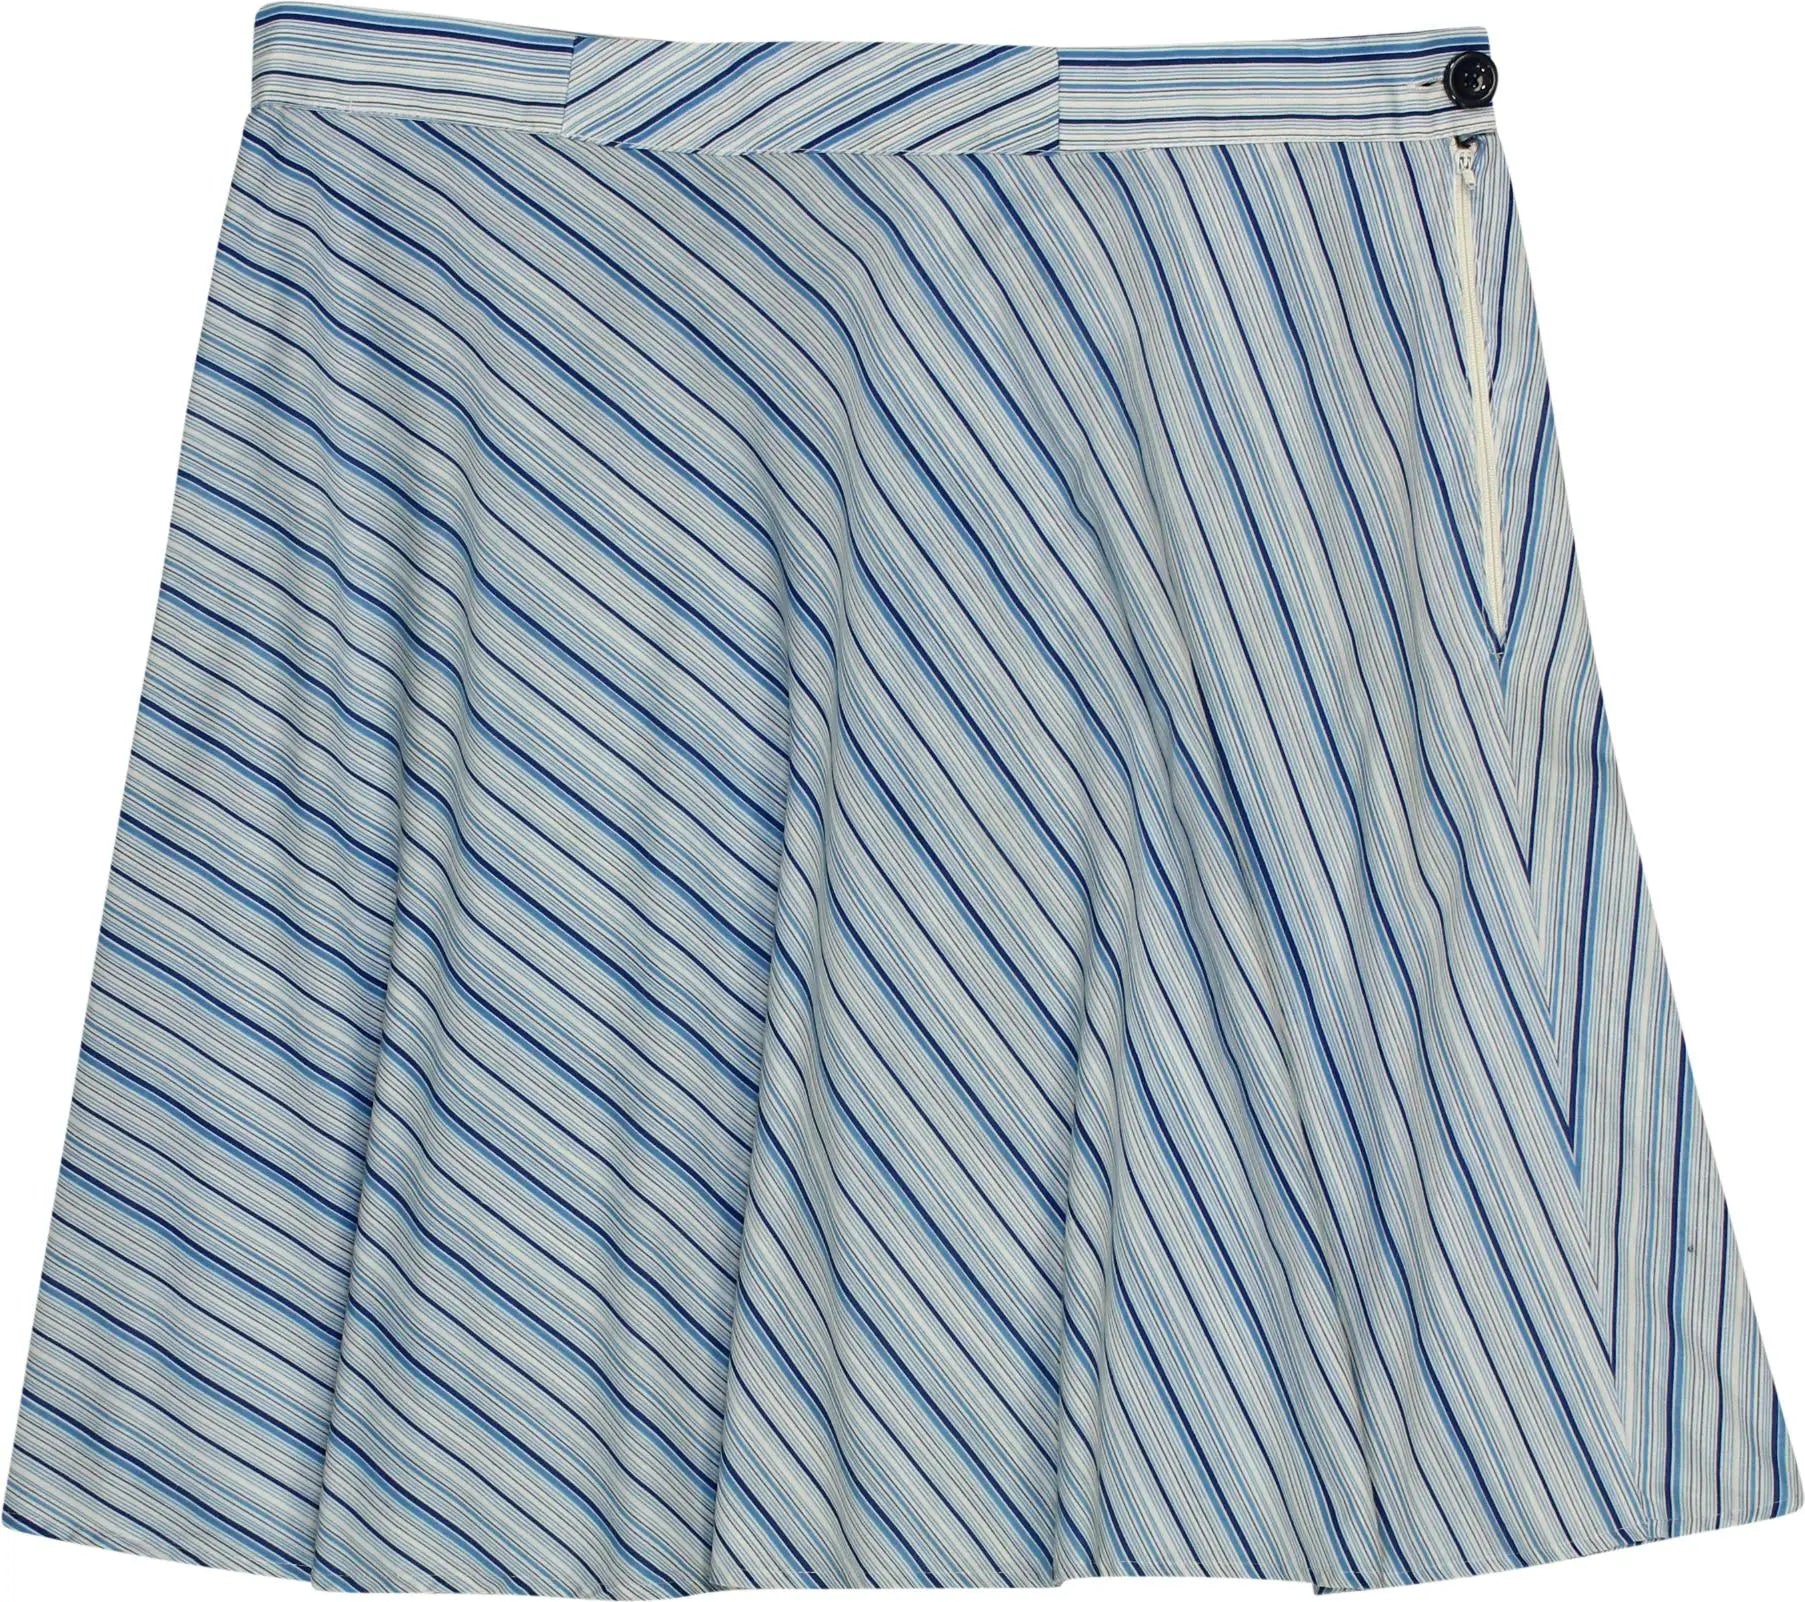 Unknown - Striped Skirt- ThriftTale.com - Vintage and second handclothing